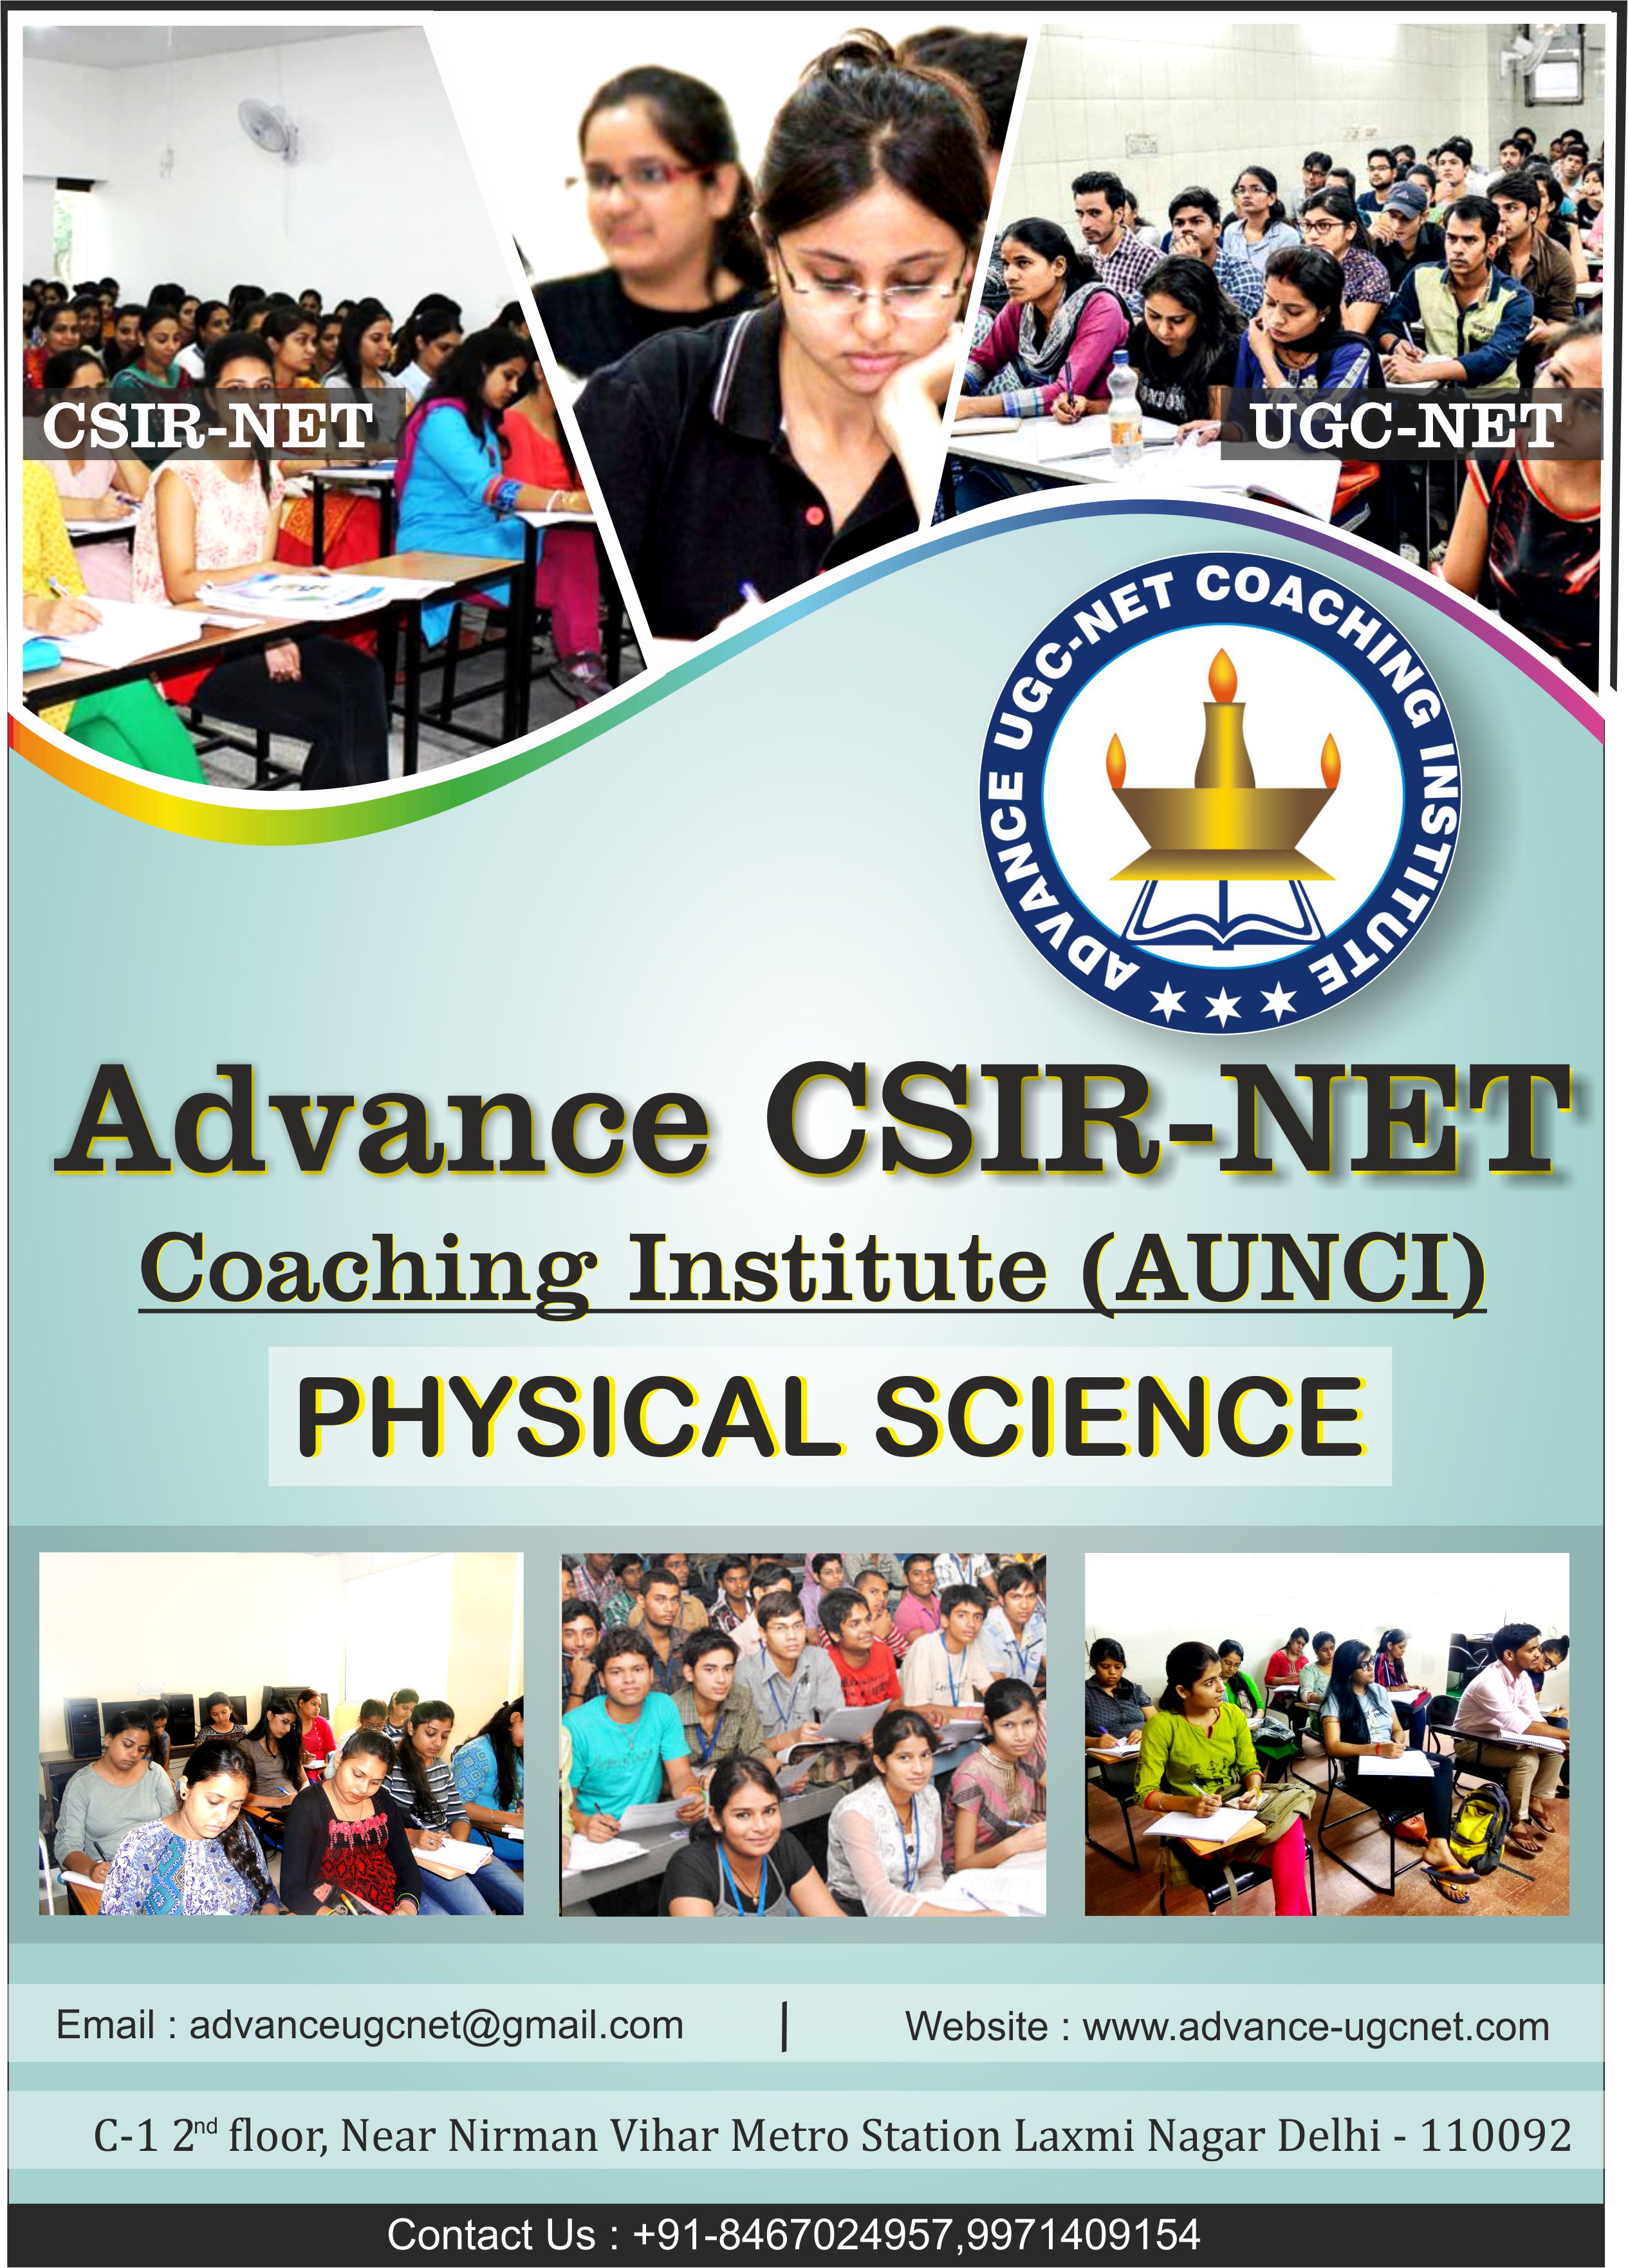 ugc net physical science coaching institute in delhi, 	ugc net physical science coaching in delhi, UGC net physical science coaching centers in delhi, UGC net Physical science coaching in laxmi delhi, ugc net jrf coaching institute in delhi